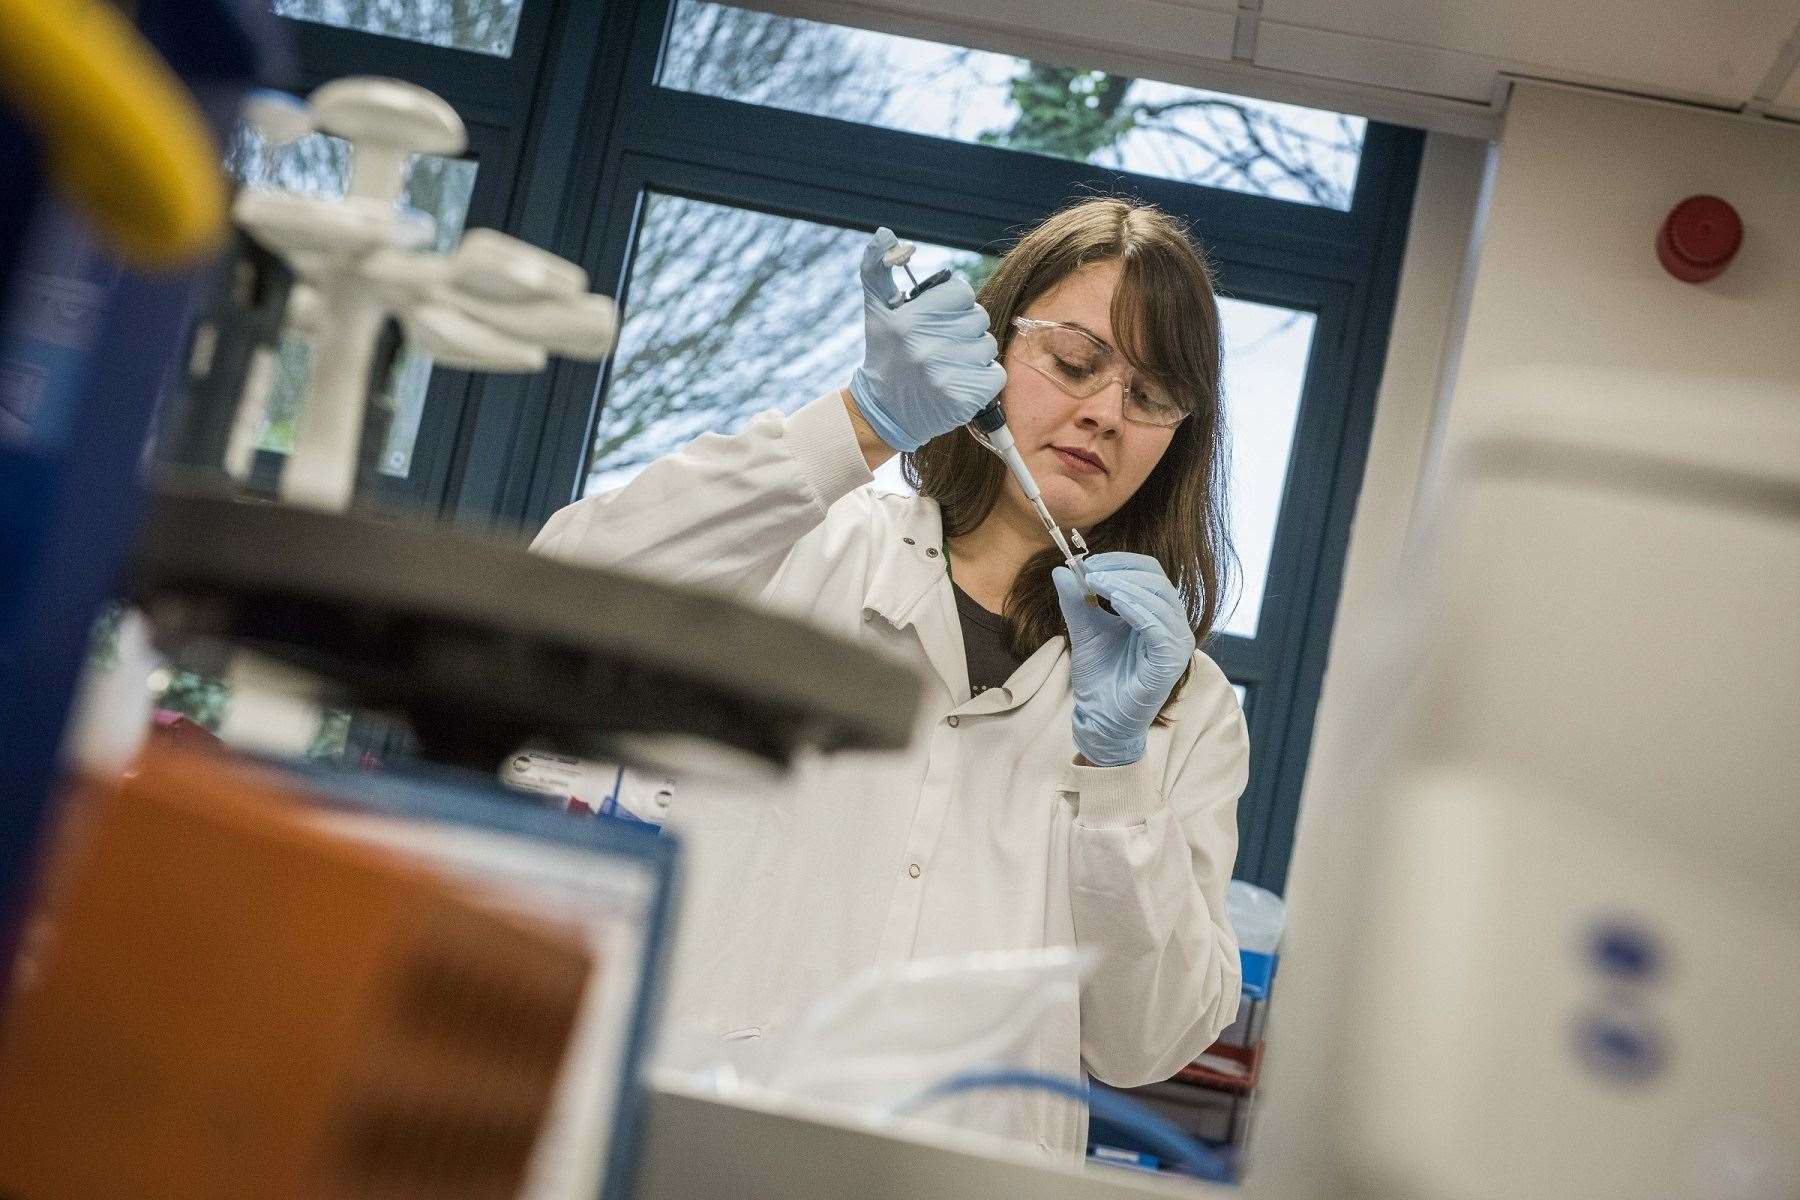 SRUC scientists are expanding their focus to assess future public health threats.